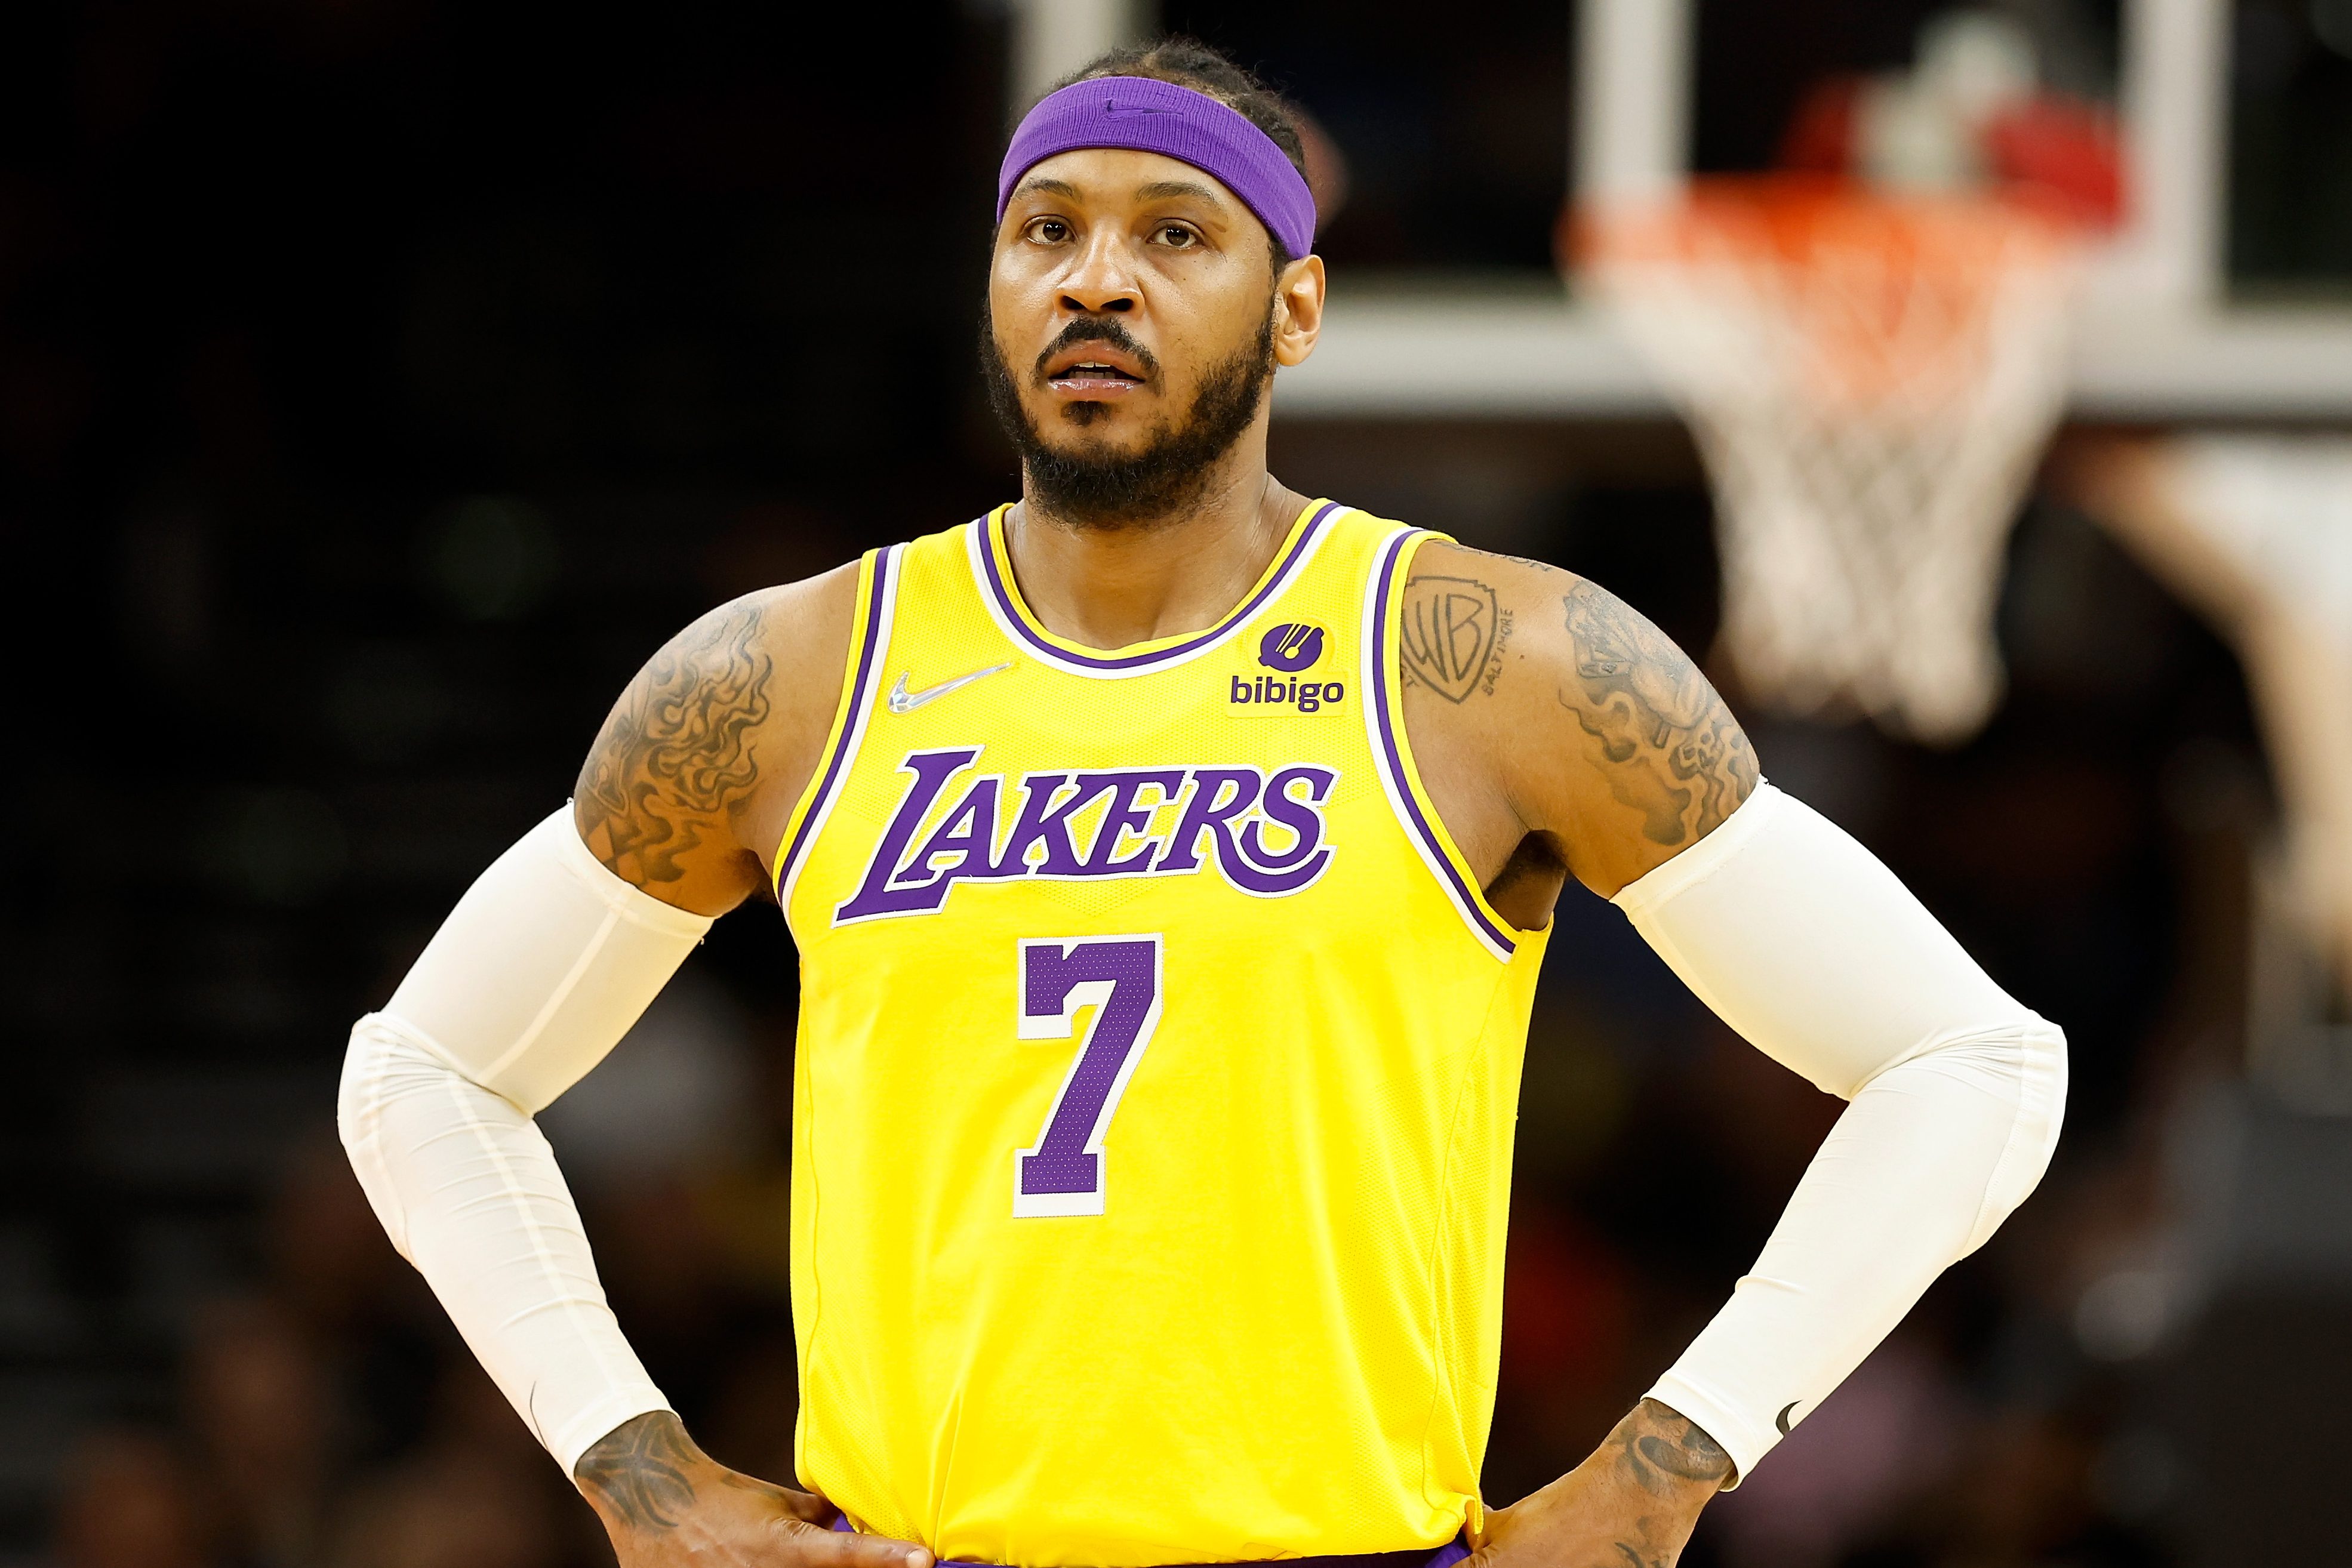 Carmelo Anthony, 10-time NBA All-Star and one of basketball's